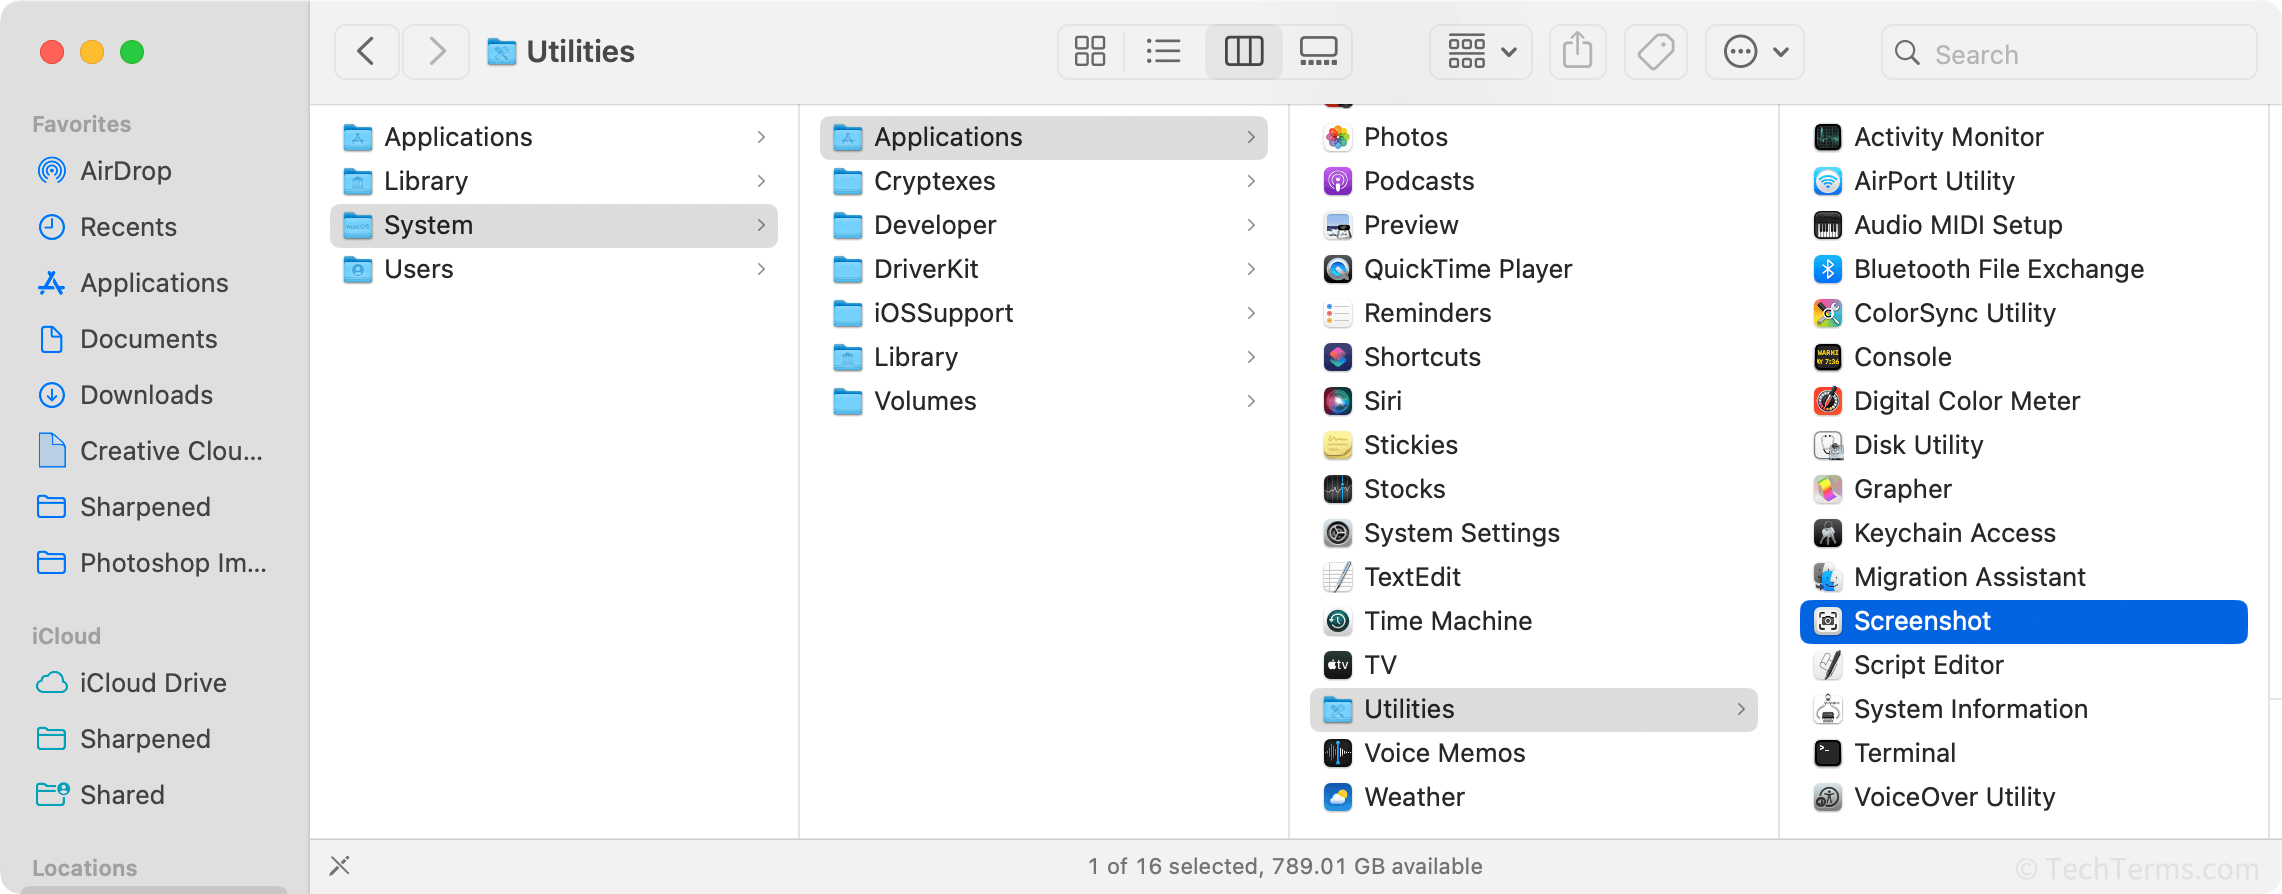 File systems support folders and nested subfolders to help organize files